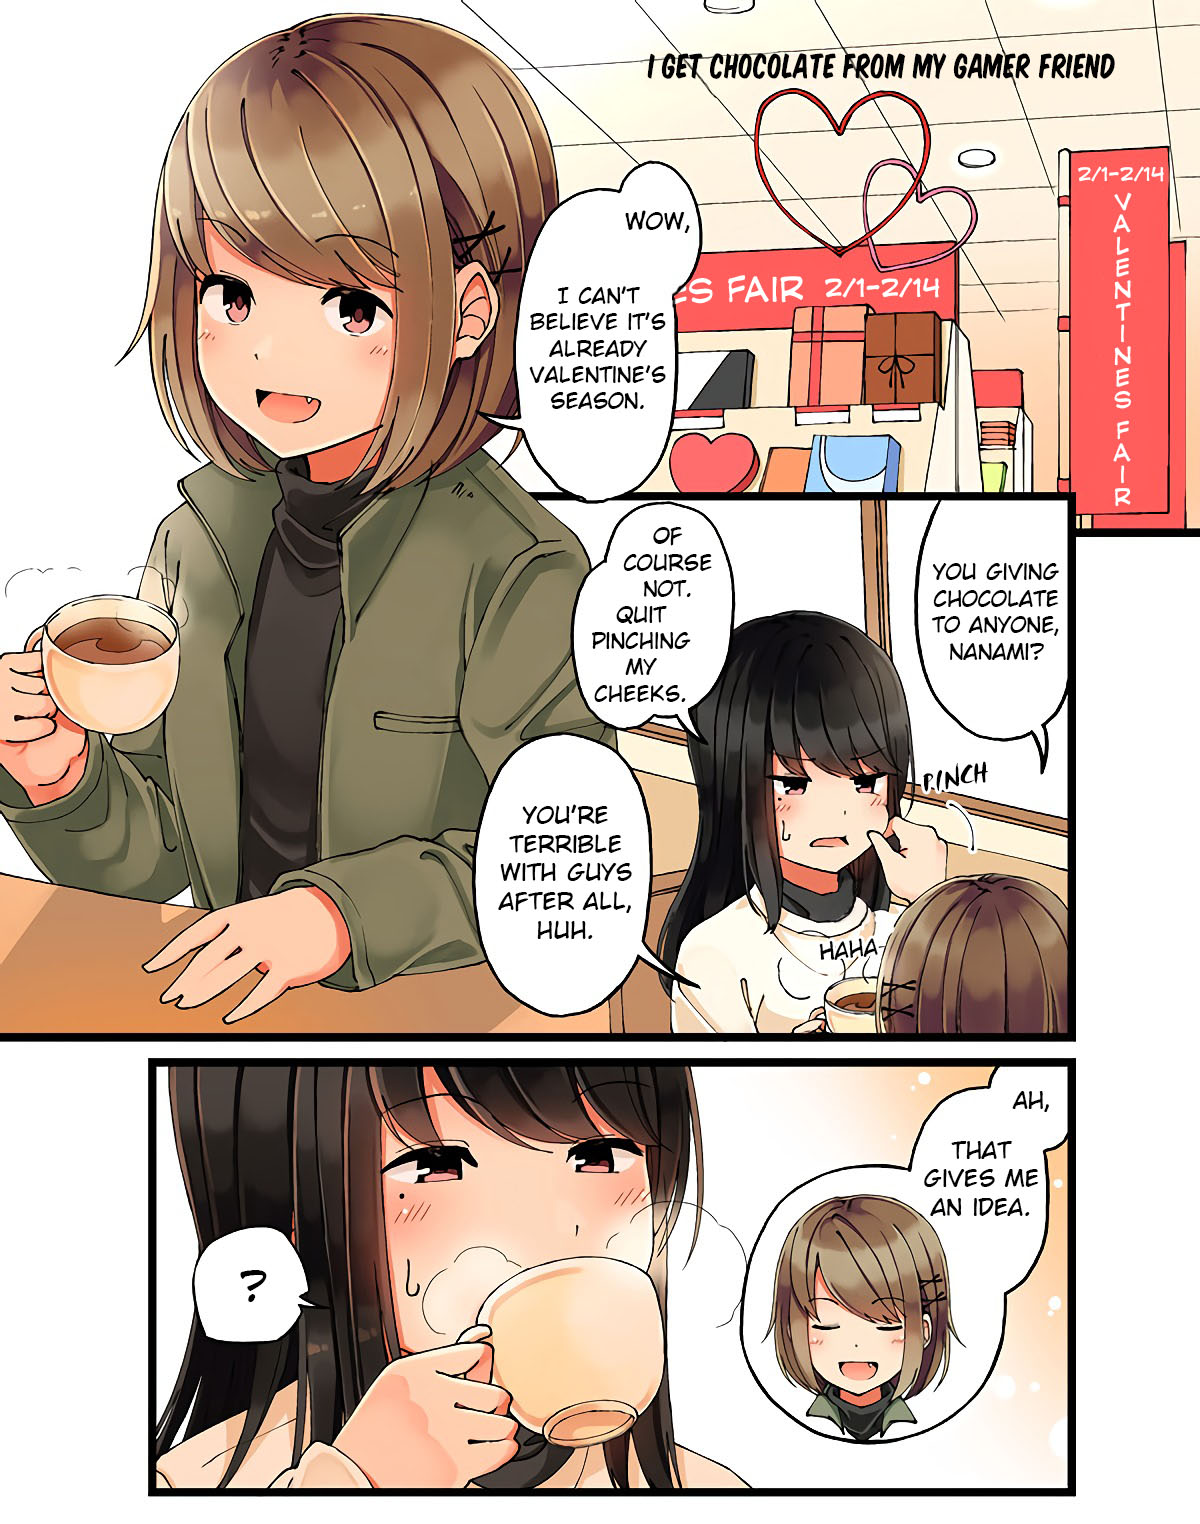 Hanging Out With A Gamer Girl Chapter 17: I Get Chocolate From My Gamer Friend - Picture 1